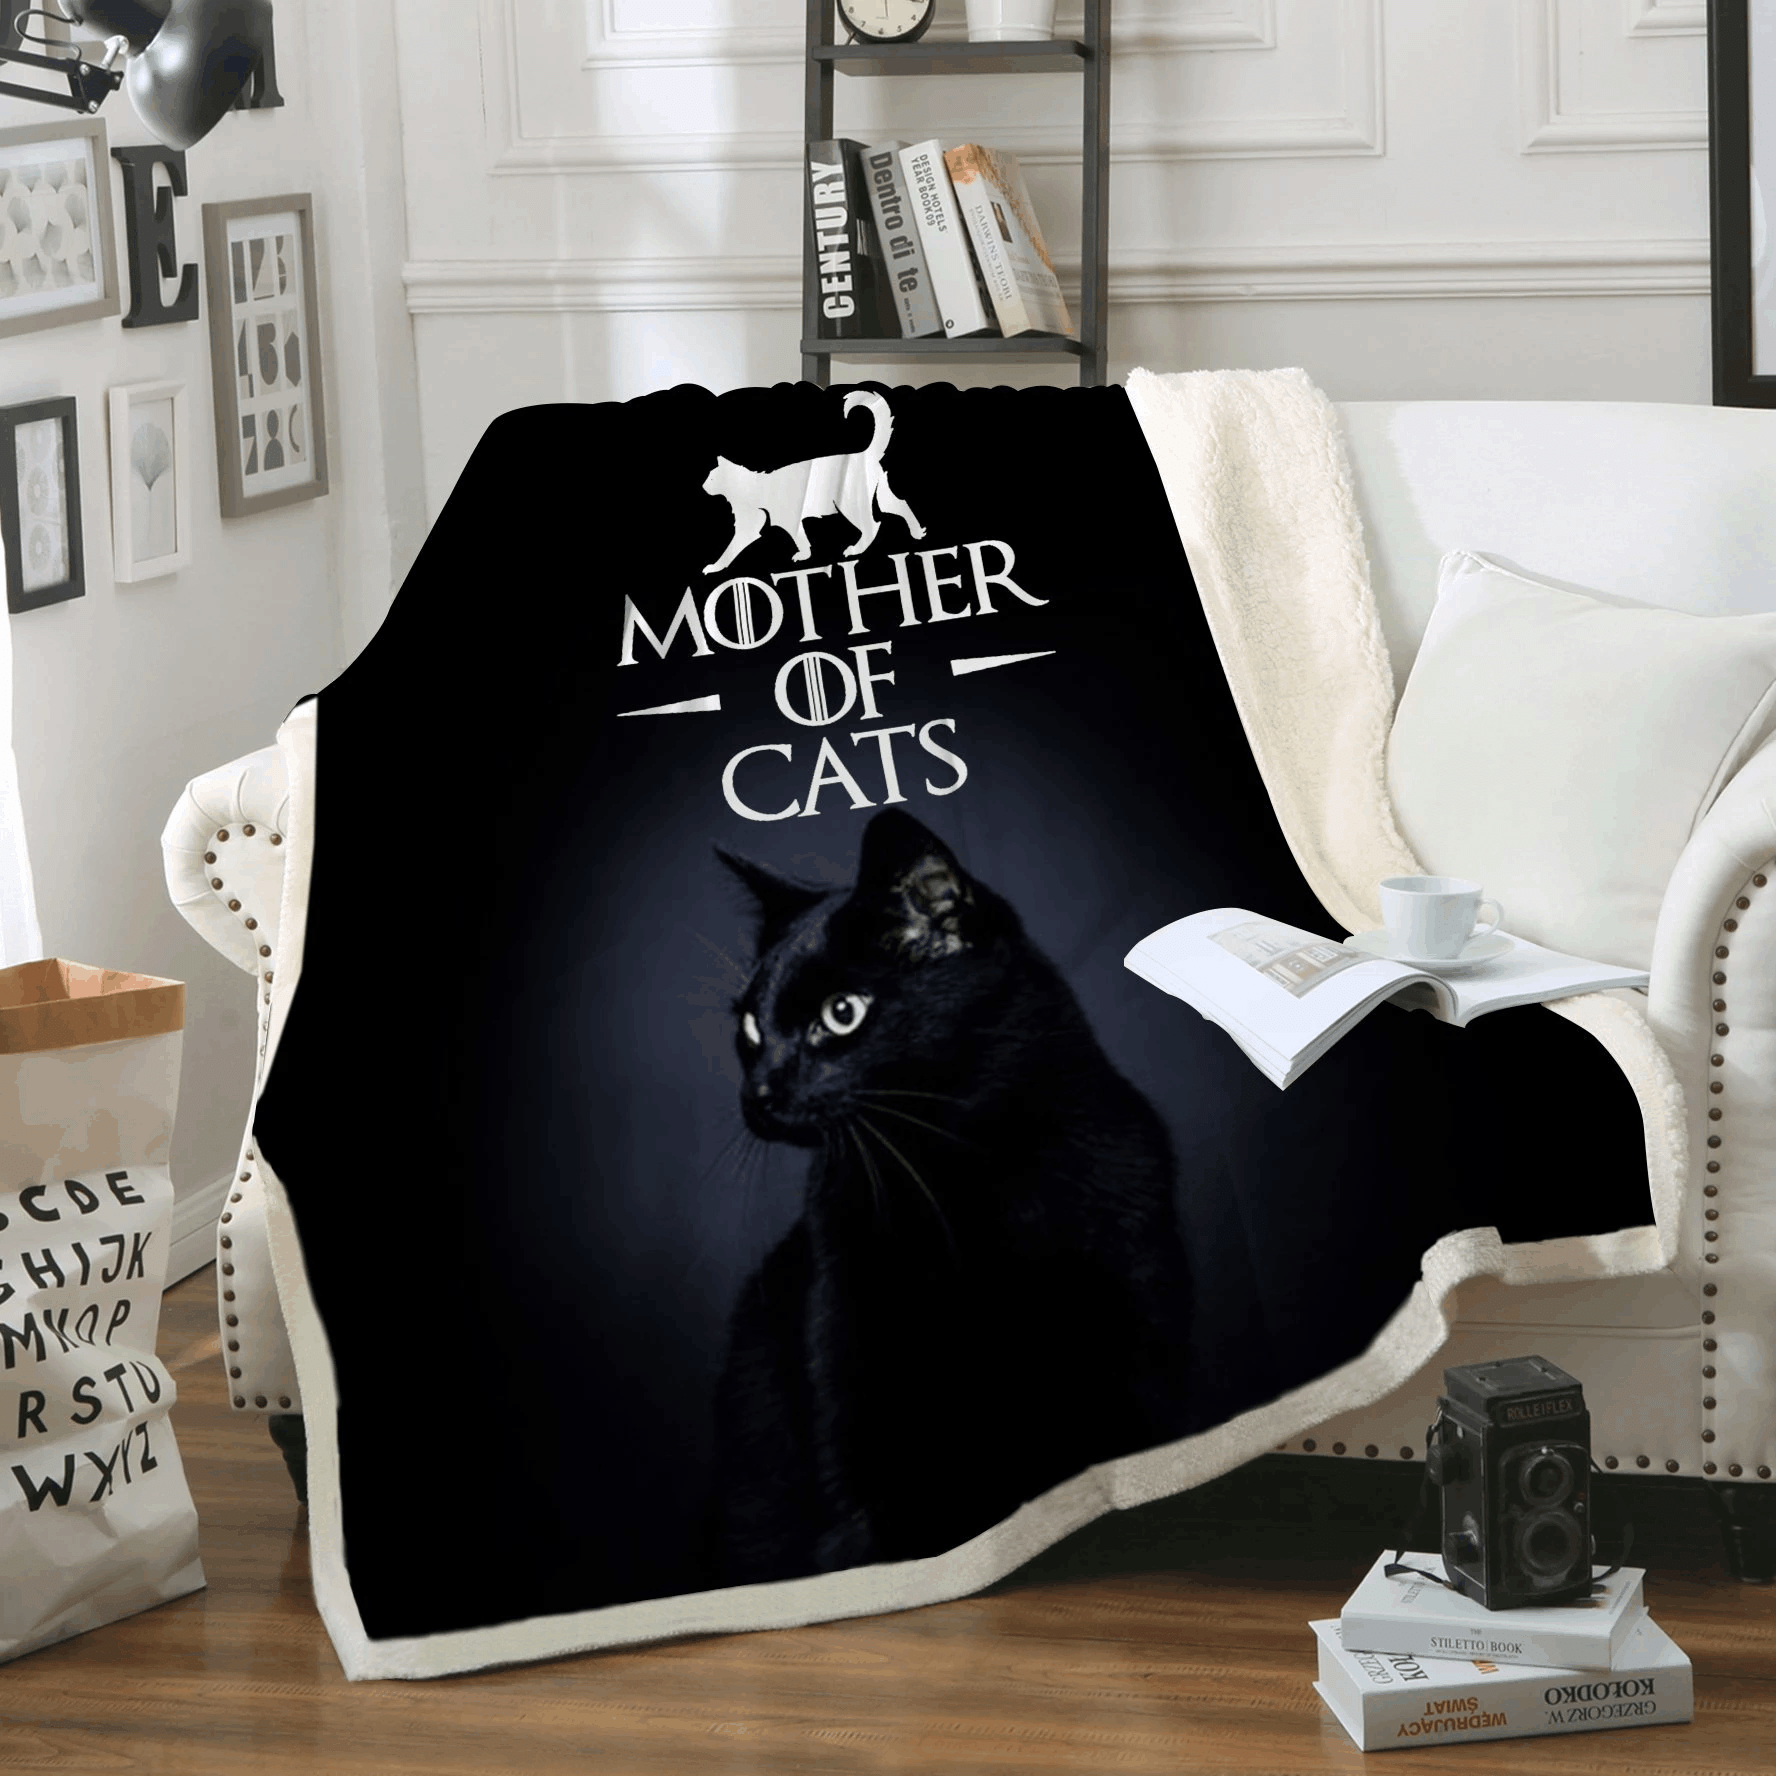 Mother Of Cats Blanket Gifts For Cat Lovers And Pets Black Cats Game Of Thrones Inspired Theme Sherpa Fleece Blanket Great Customized Blanket Gifts For Mother’s Day Birthday Christmas Thanksgiving Cat Lovers